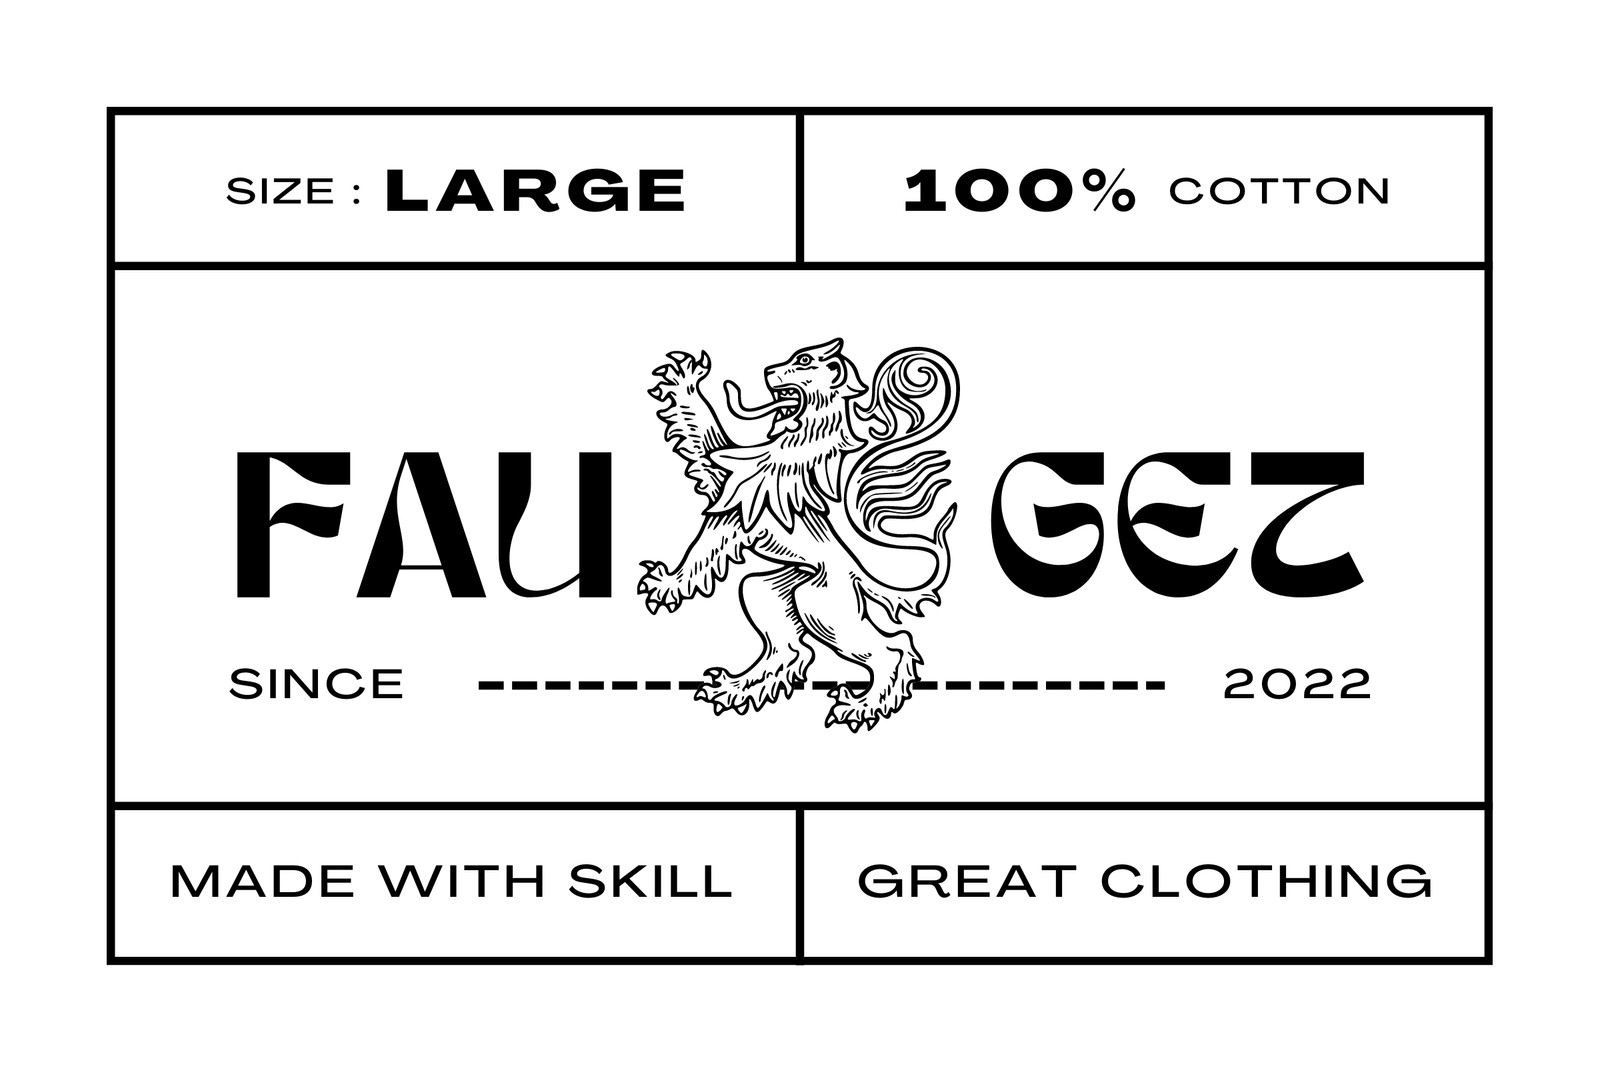 Small Fashion Brands and Clothing Labels to Shop in 2022